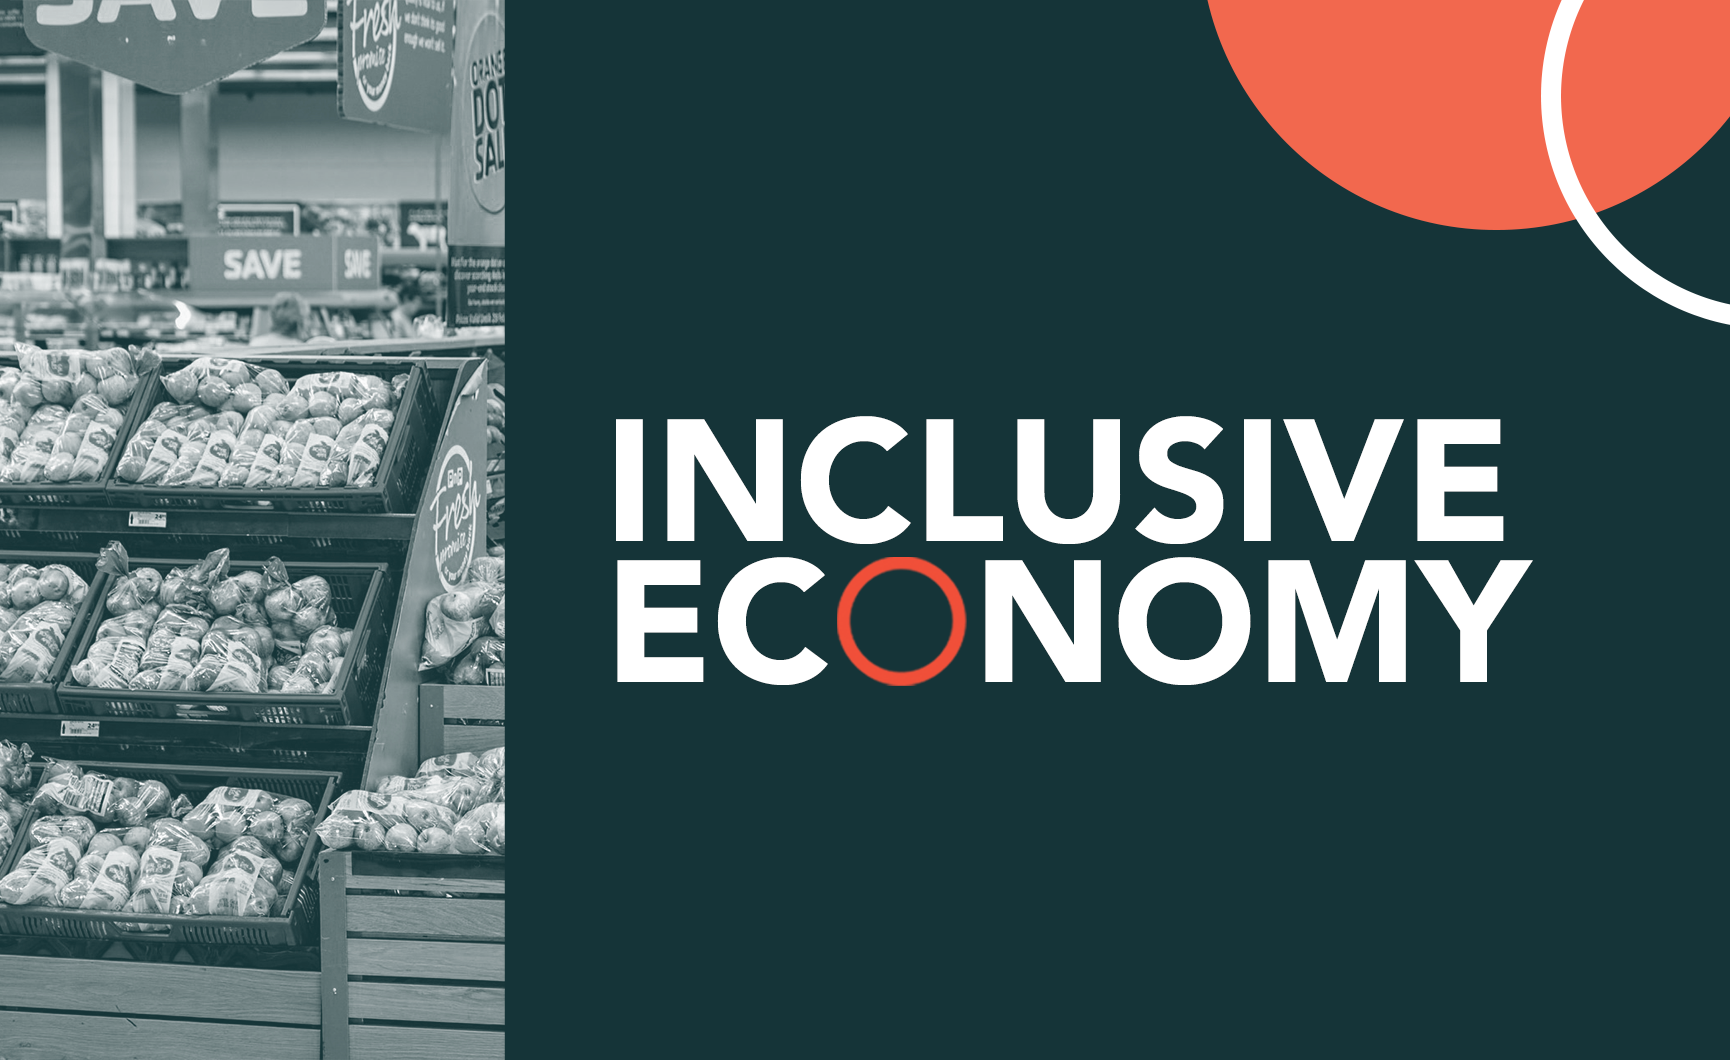 An inclusive economy, that benefits people more fairly